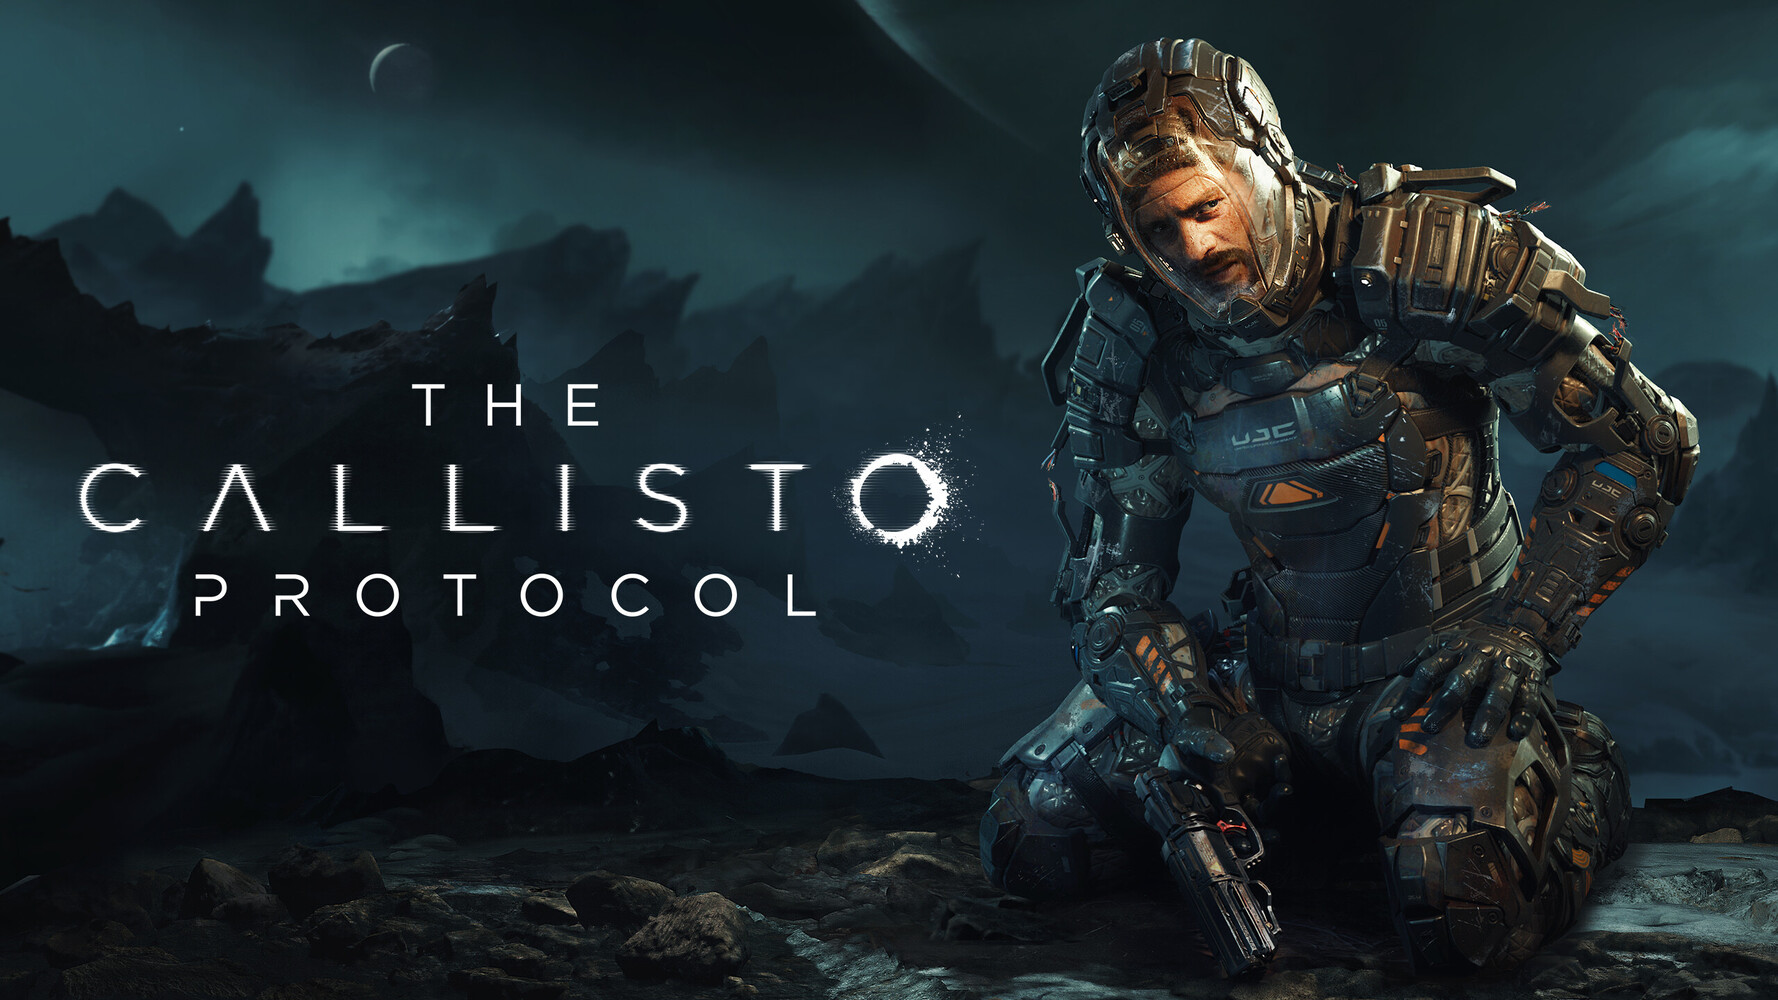 The Callisto Protocol Final Transmission DLC Gameplay Covered by